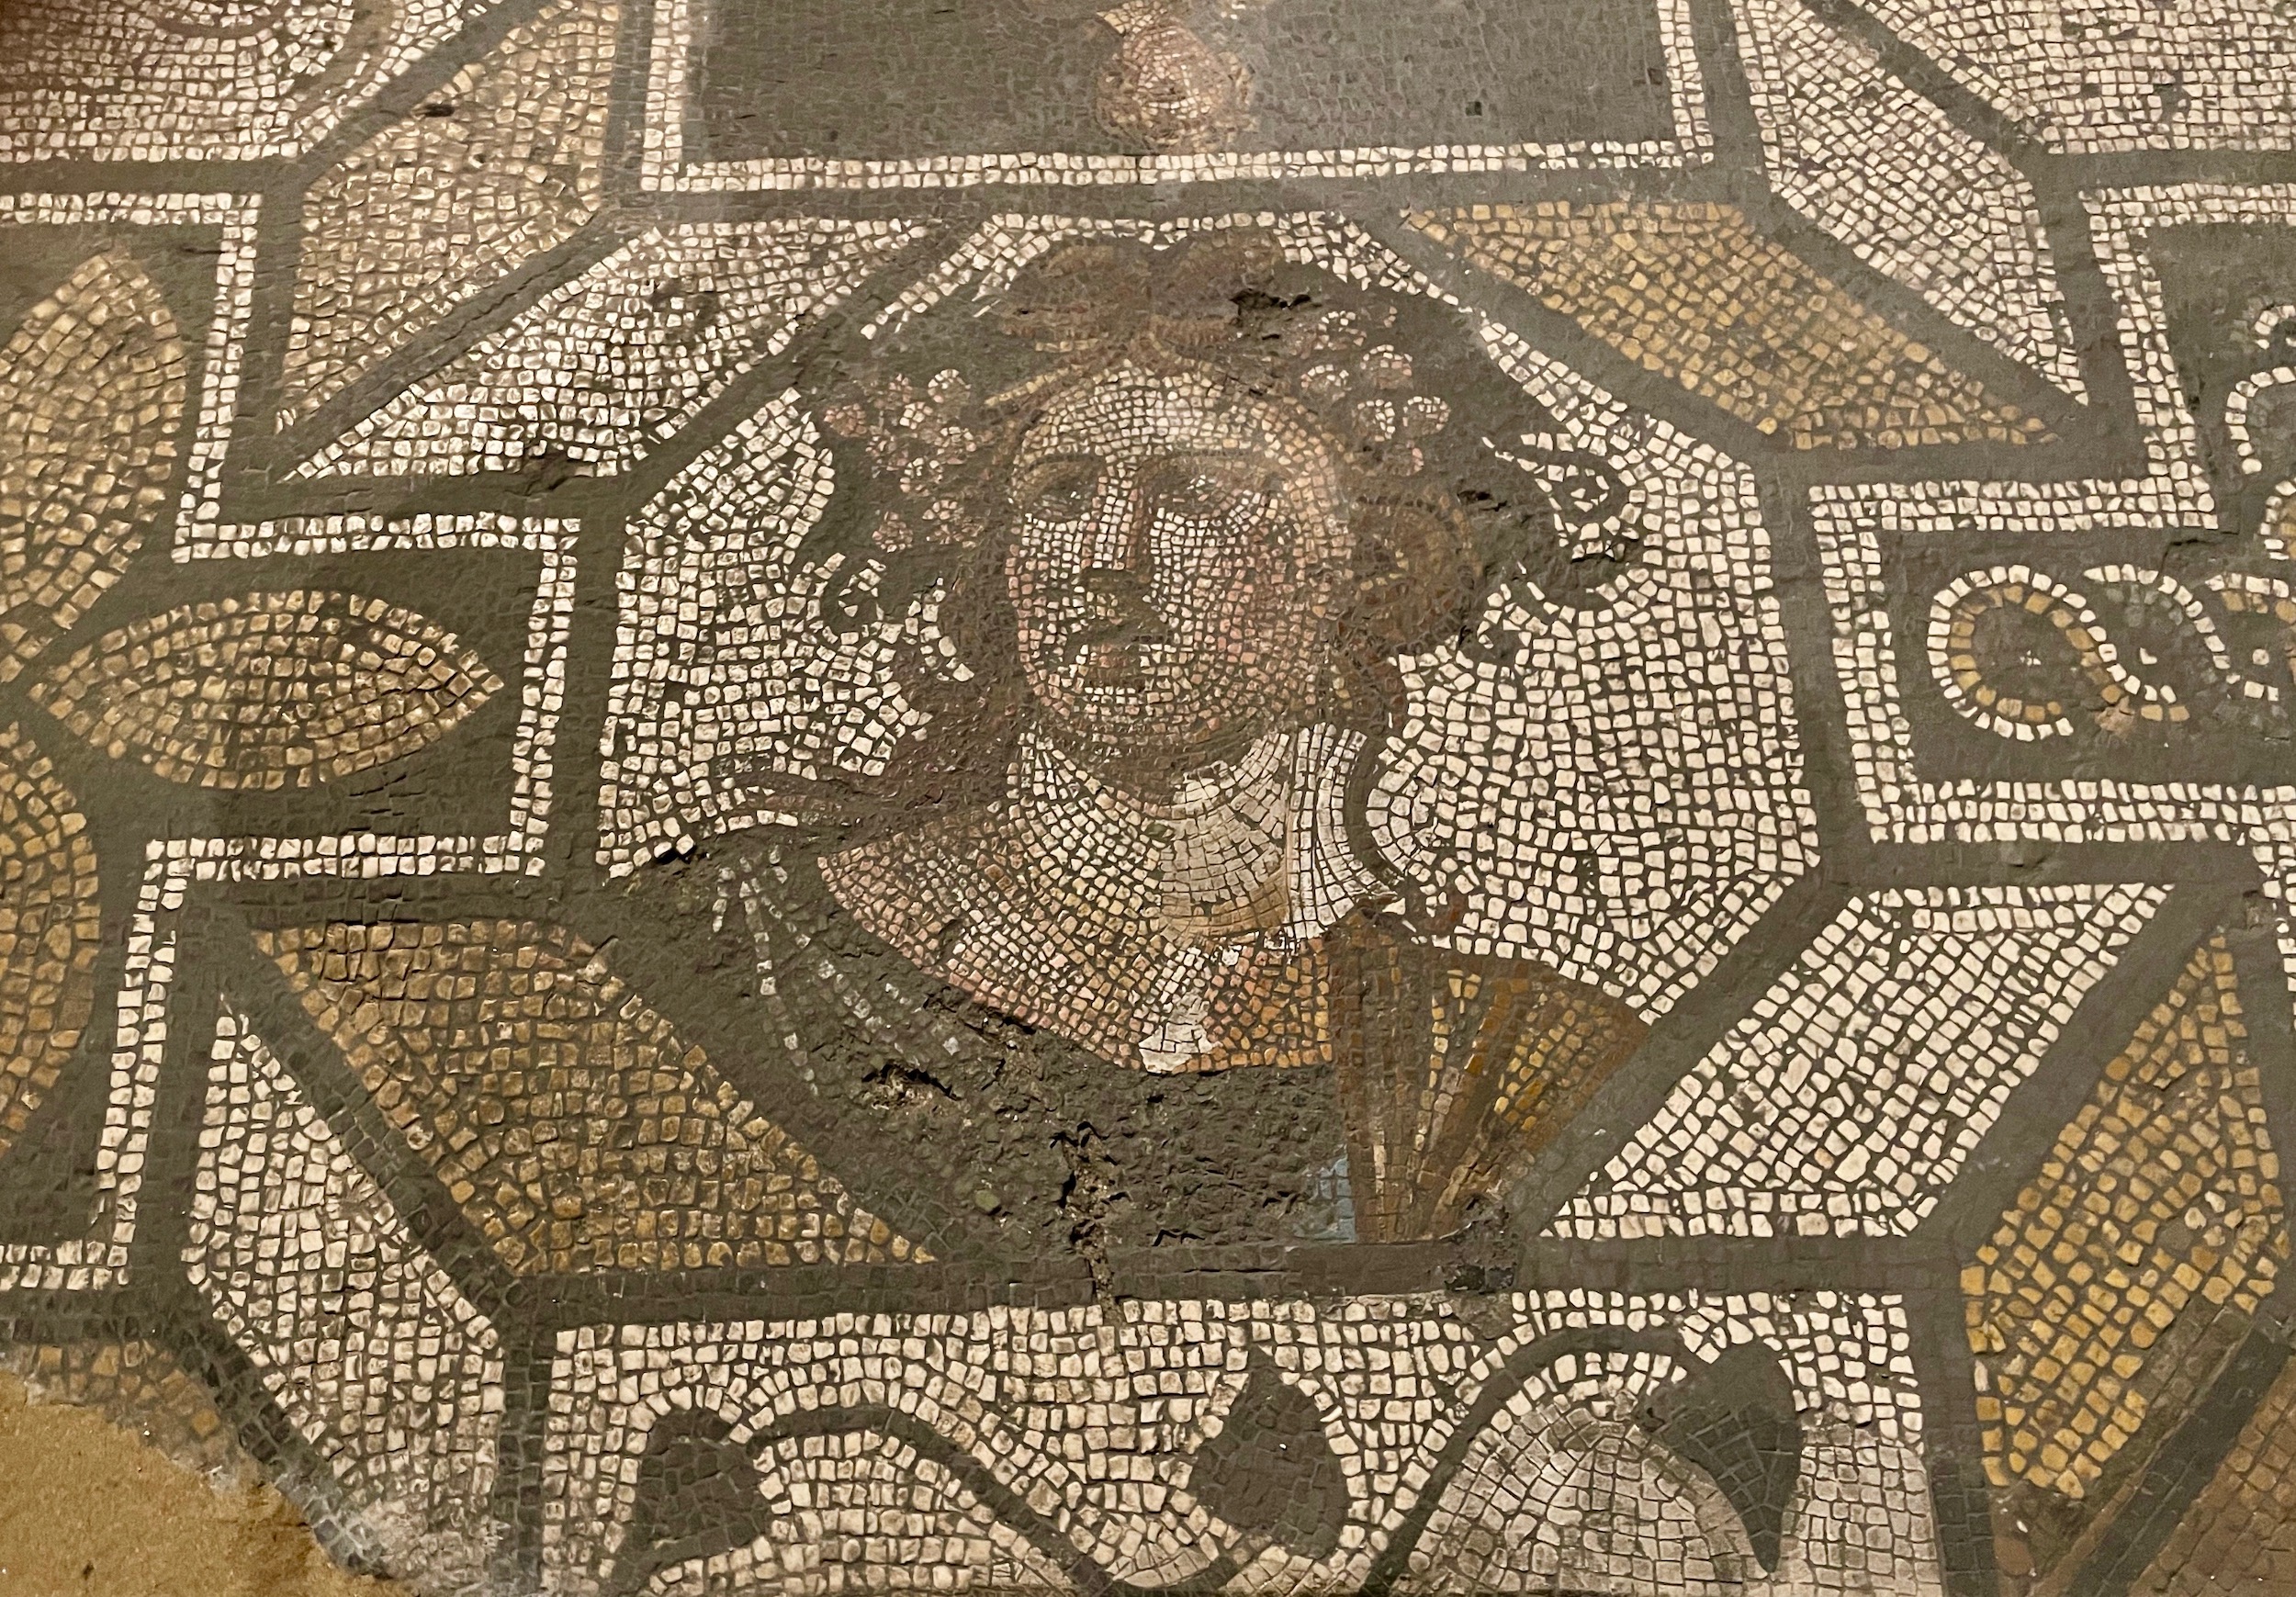 Istanbul Archaeological Museums Mosaic